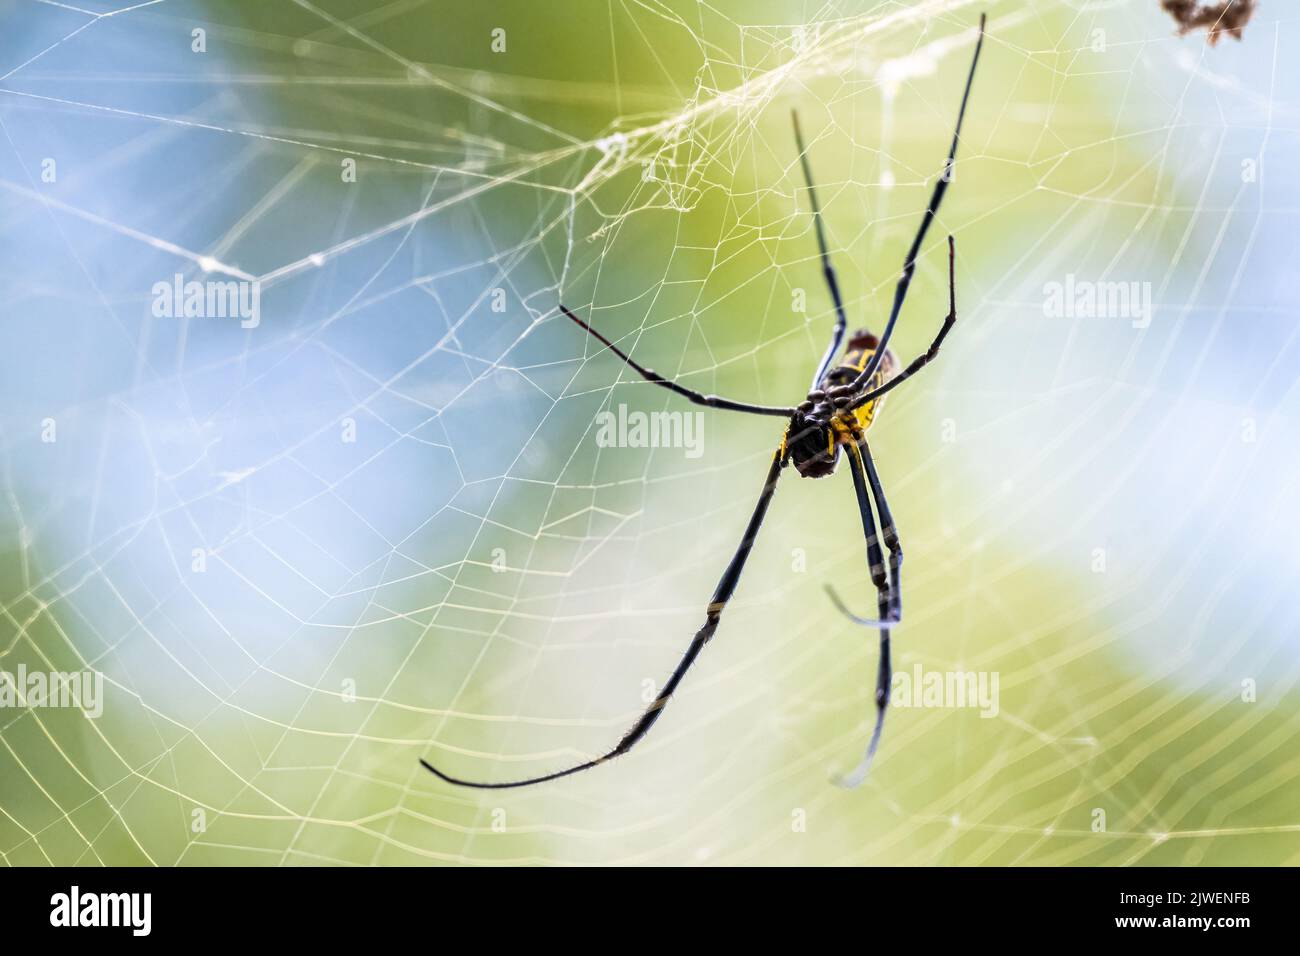 Joro spider (Trichonephila clavata), an invasive species from Asia now found in Georgia and South Carolina in the United States, on her large web. Stock Photo